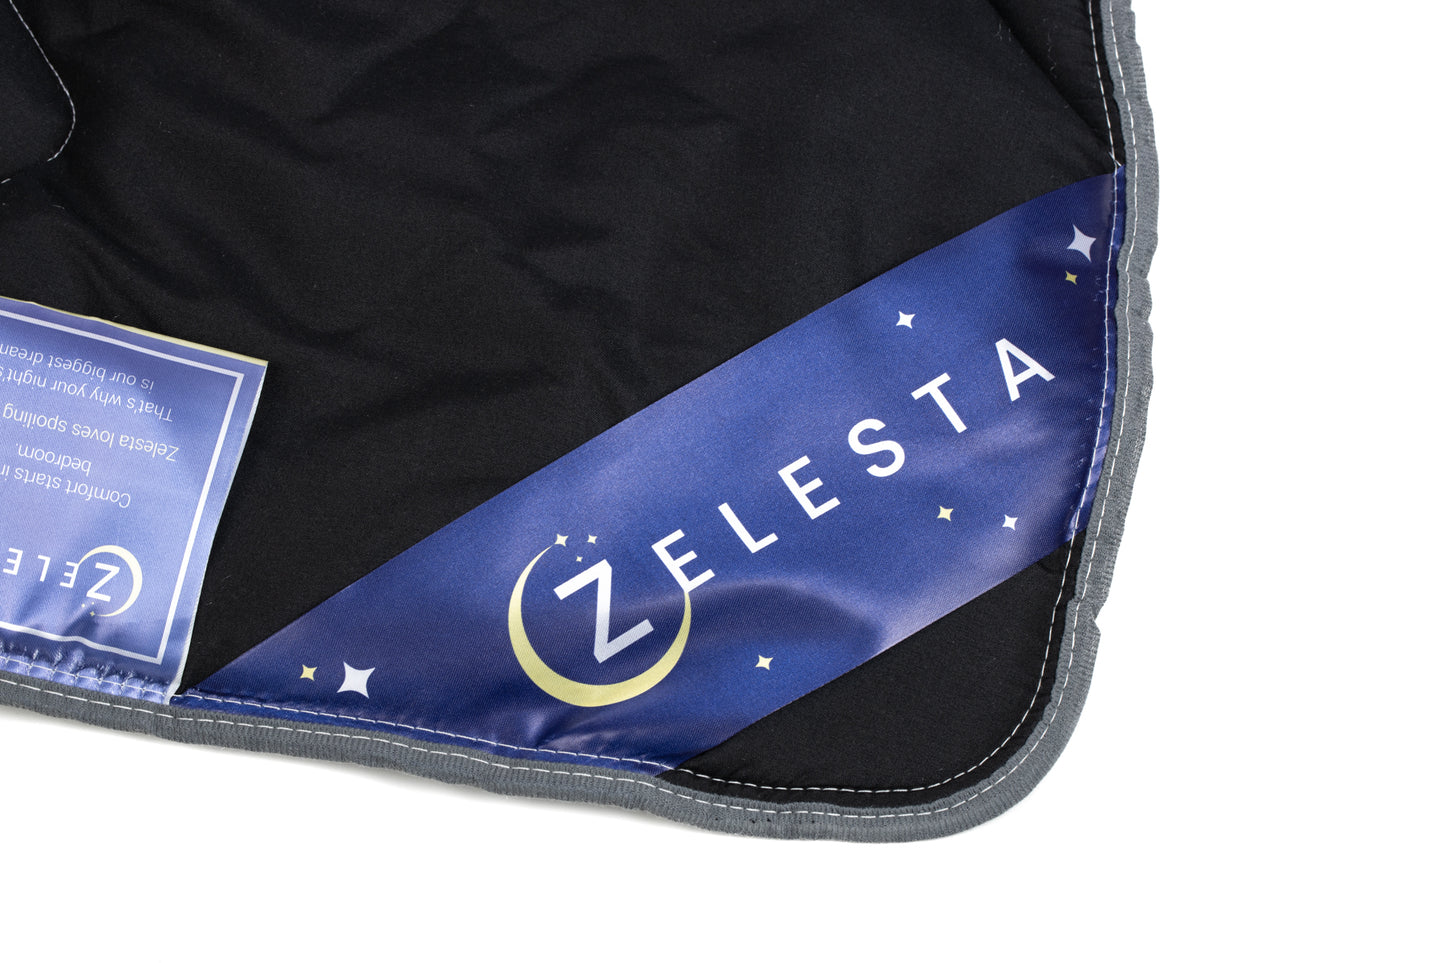 Zelesta-Wonderbed-Pitch-Black-washable-quilt-2-in-1-without-cover